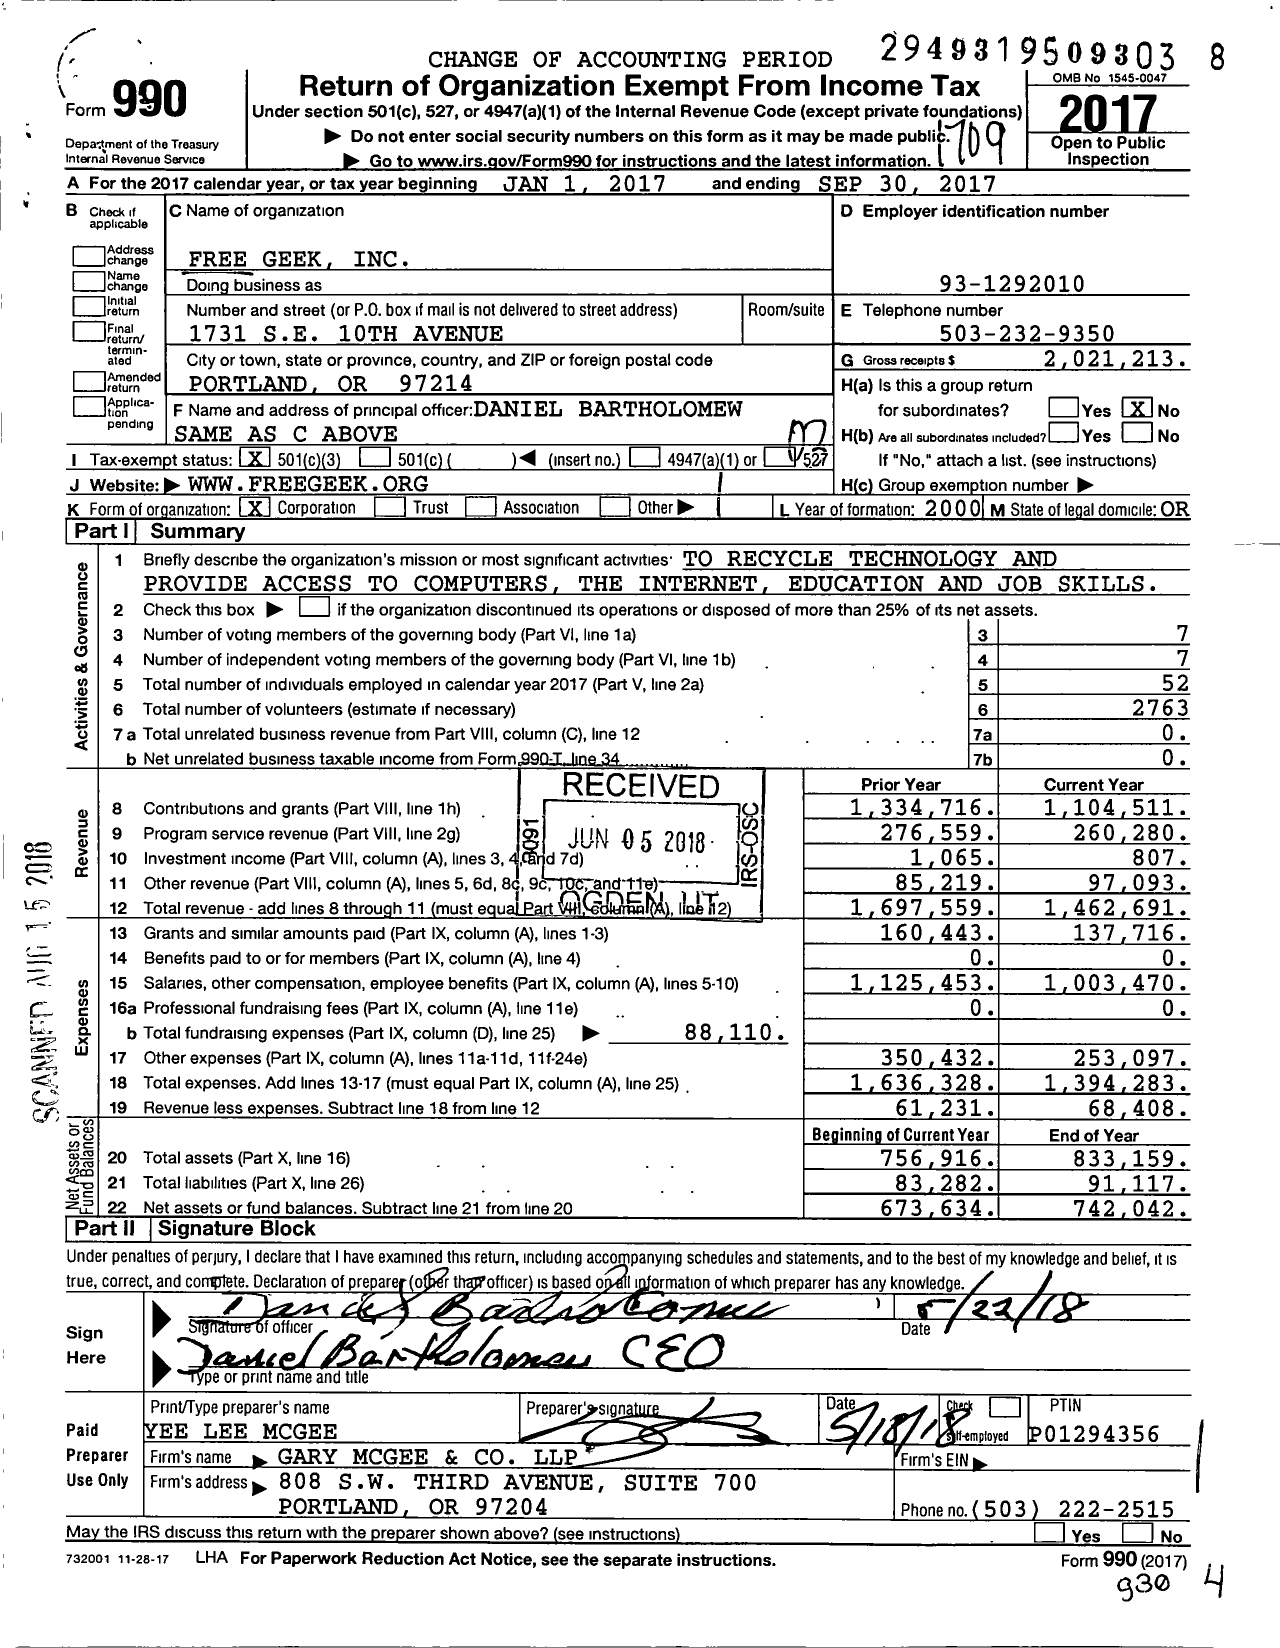 Image of first page of 2016 Form 990 for Free Geek